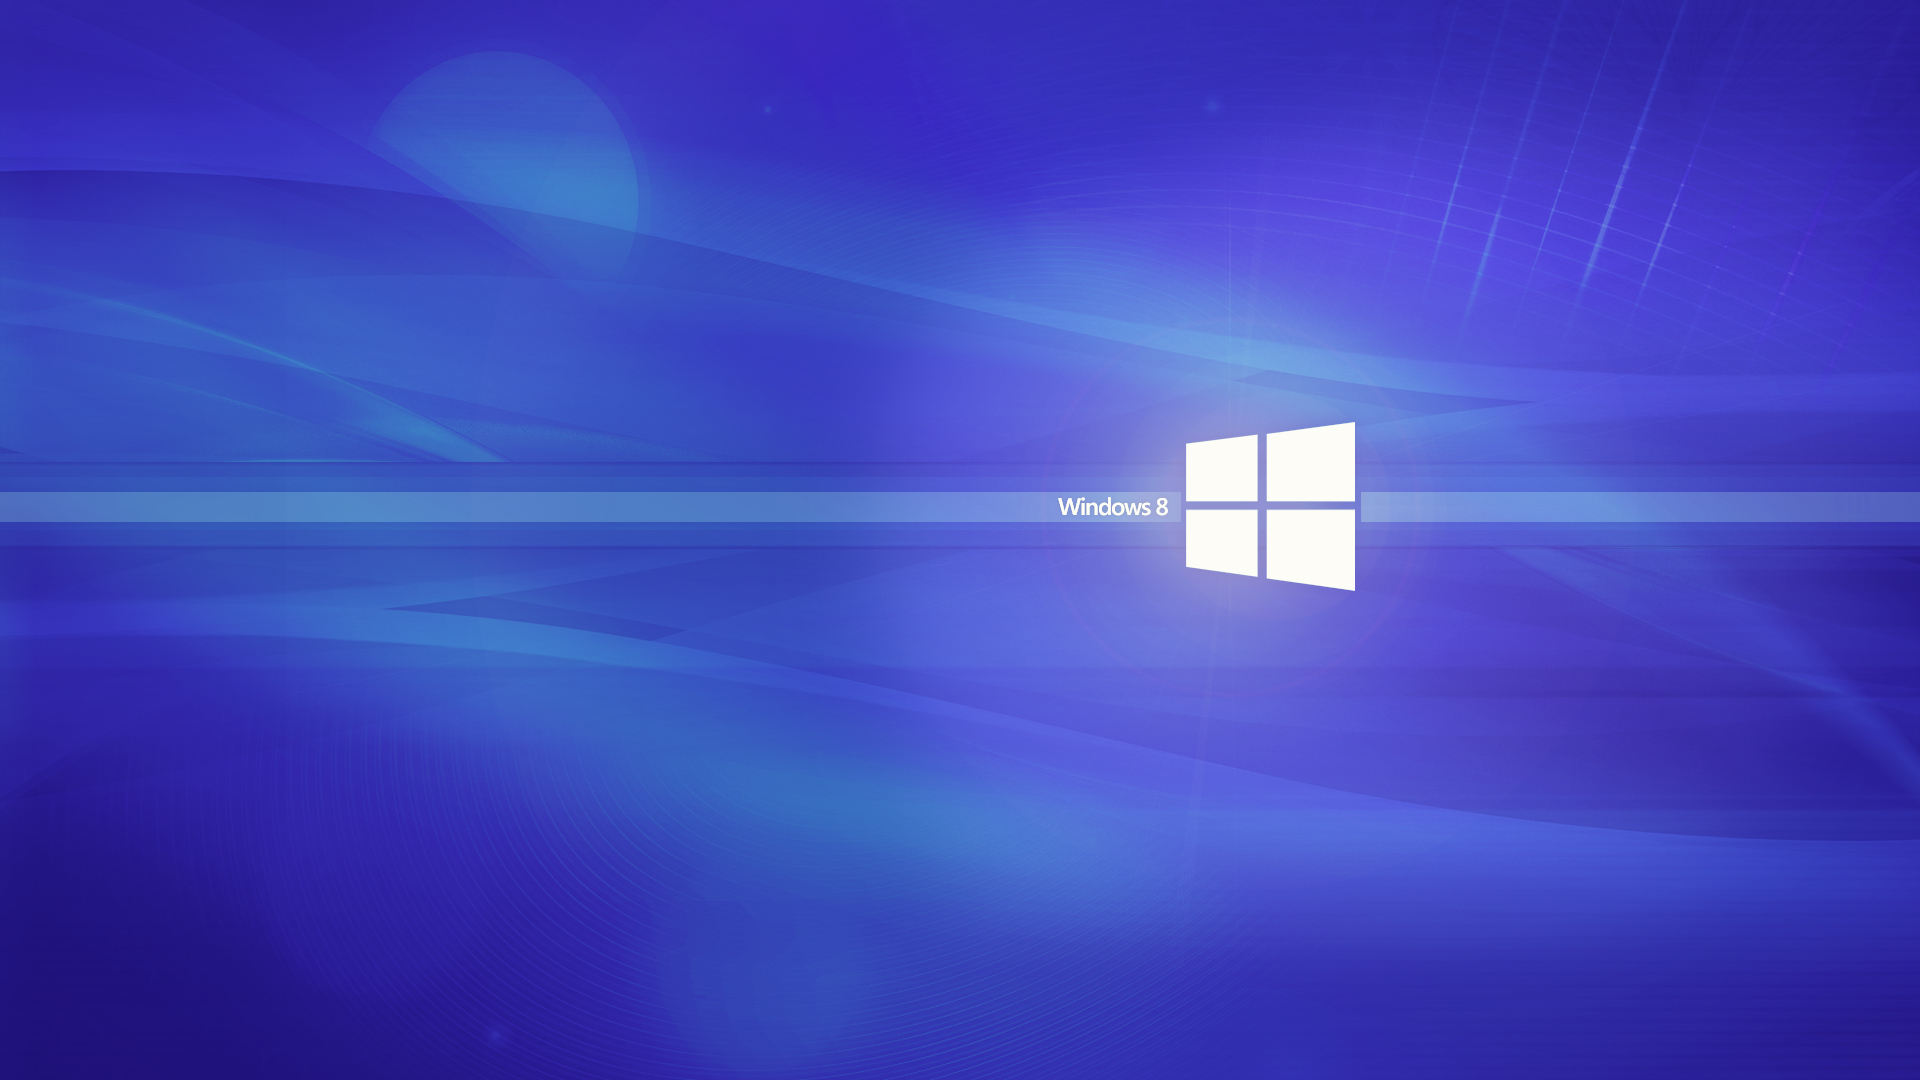 55 Windows 8 Wallpapers in HD For Free Download
 Full Hd Wallpapers For Windows 8 1920x1080